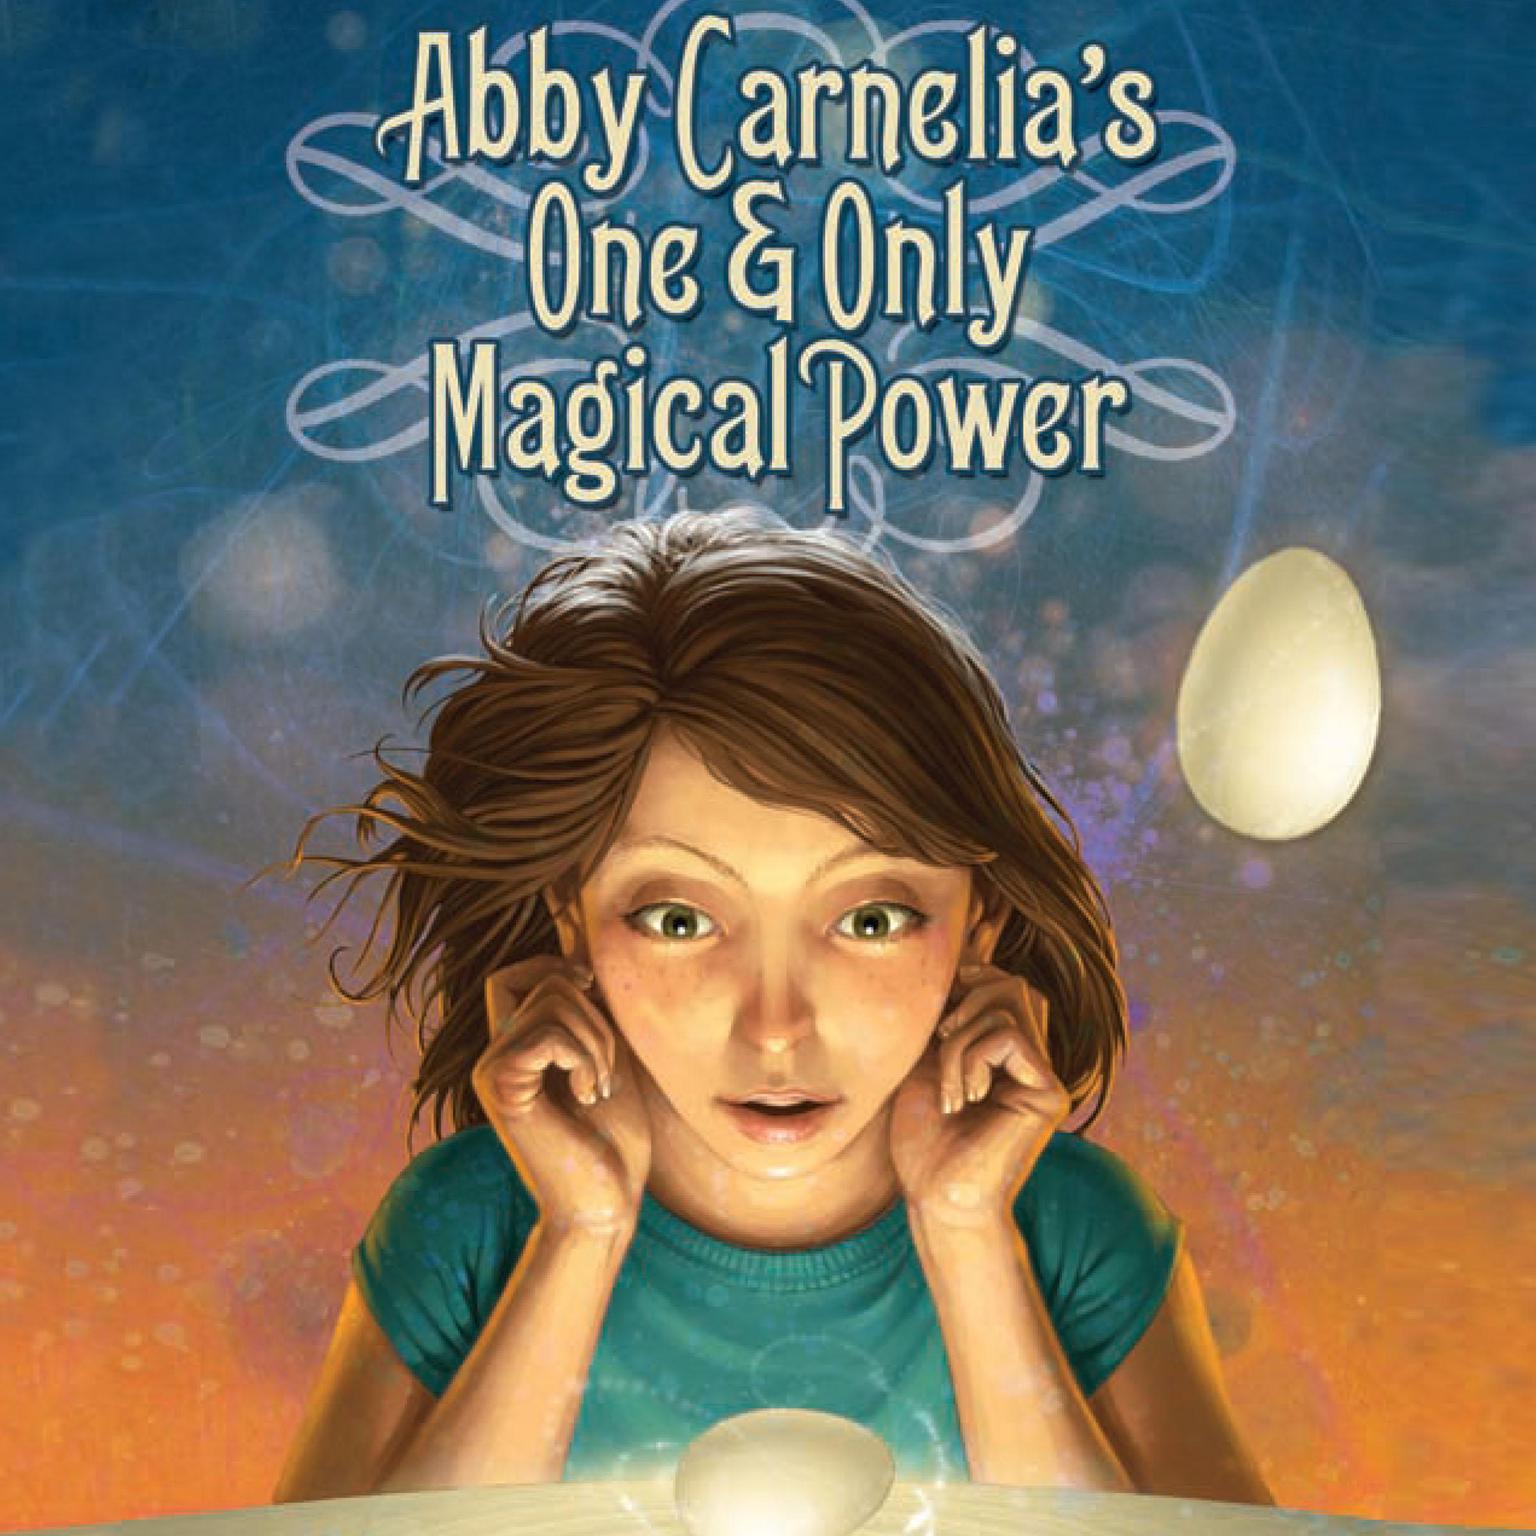 Abby Carnelias One and Only Magical Power Audiobook, by David Pogue